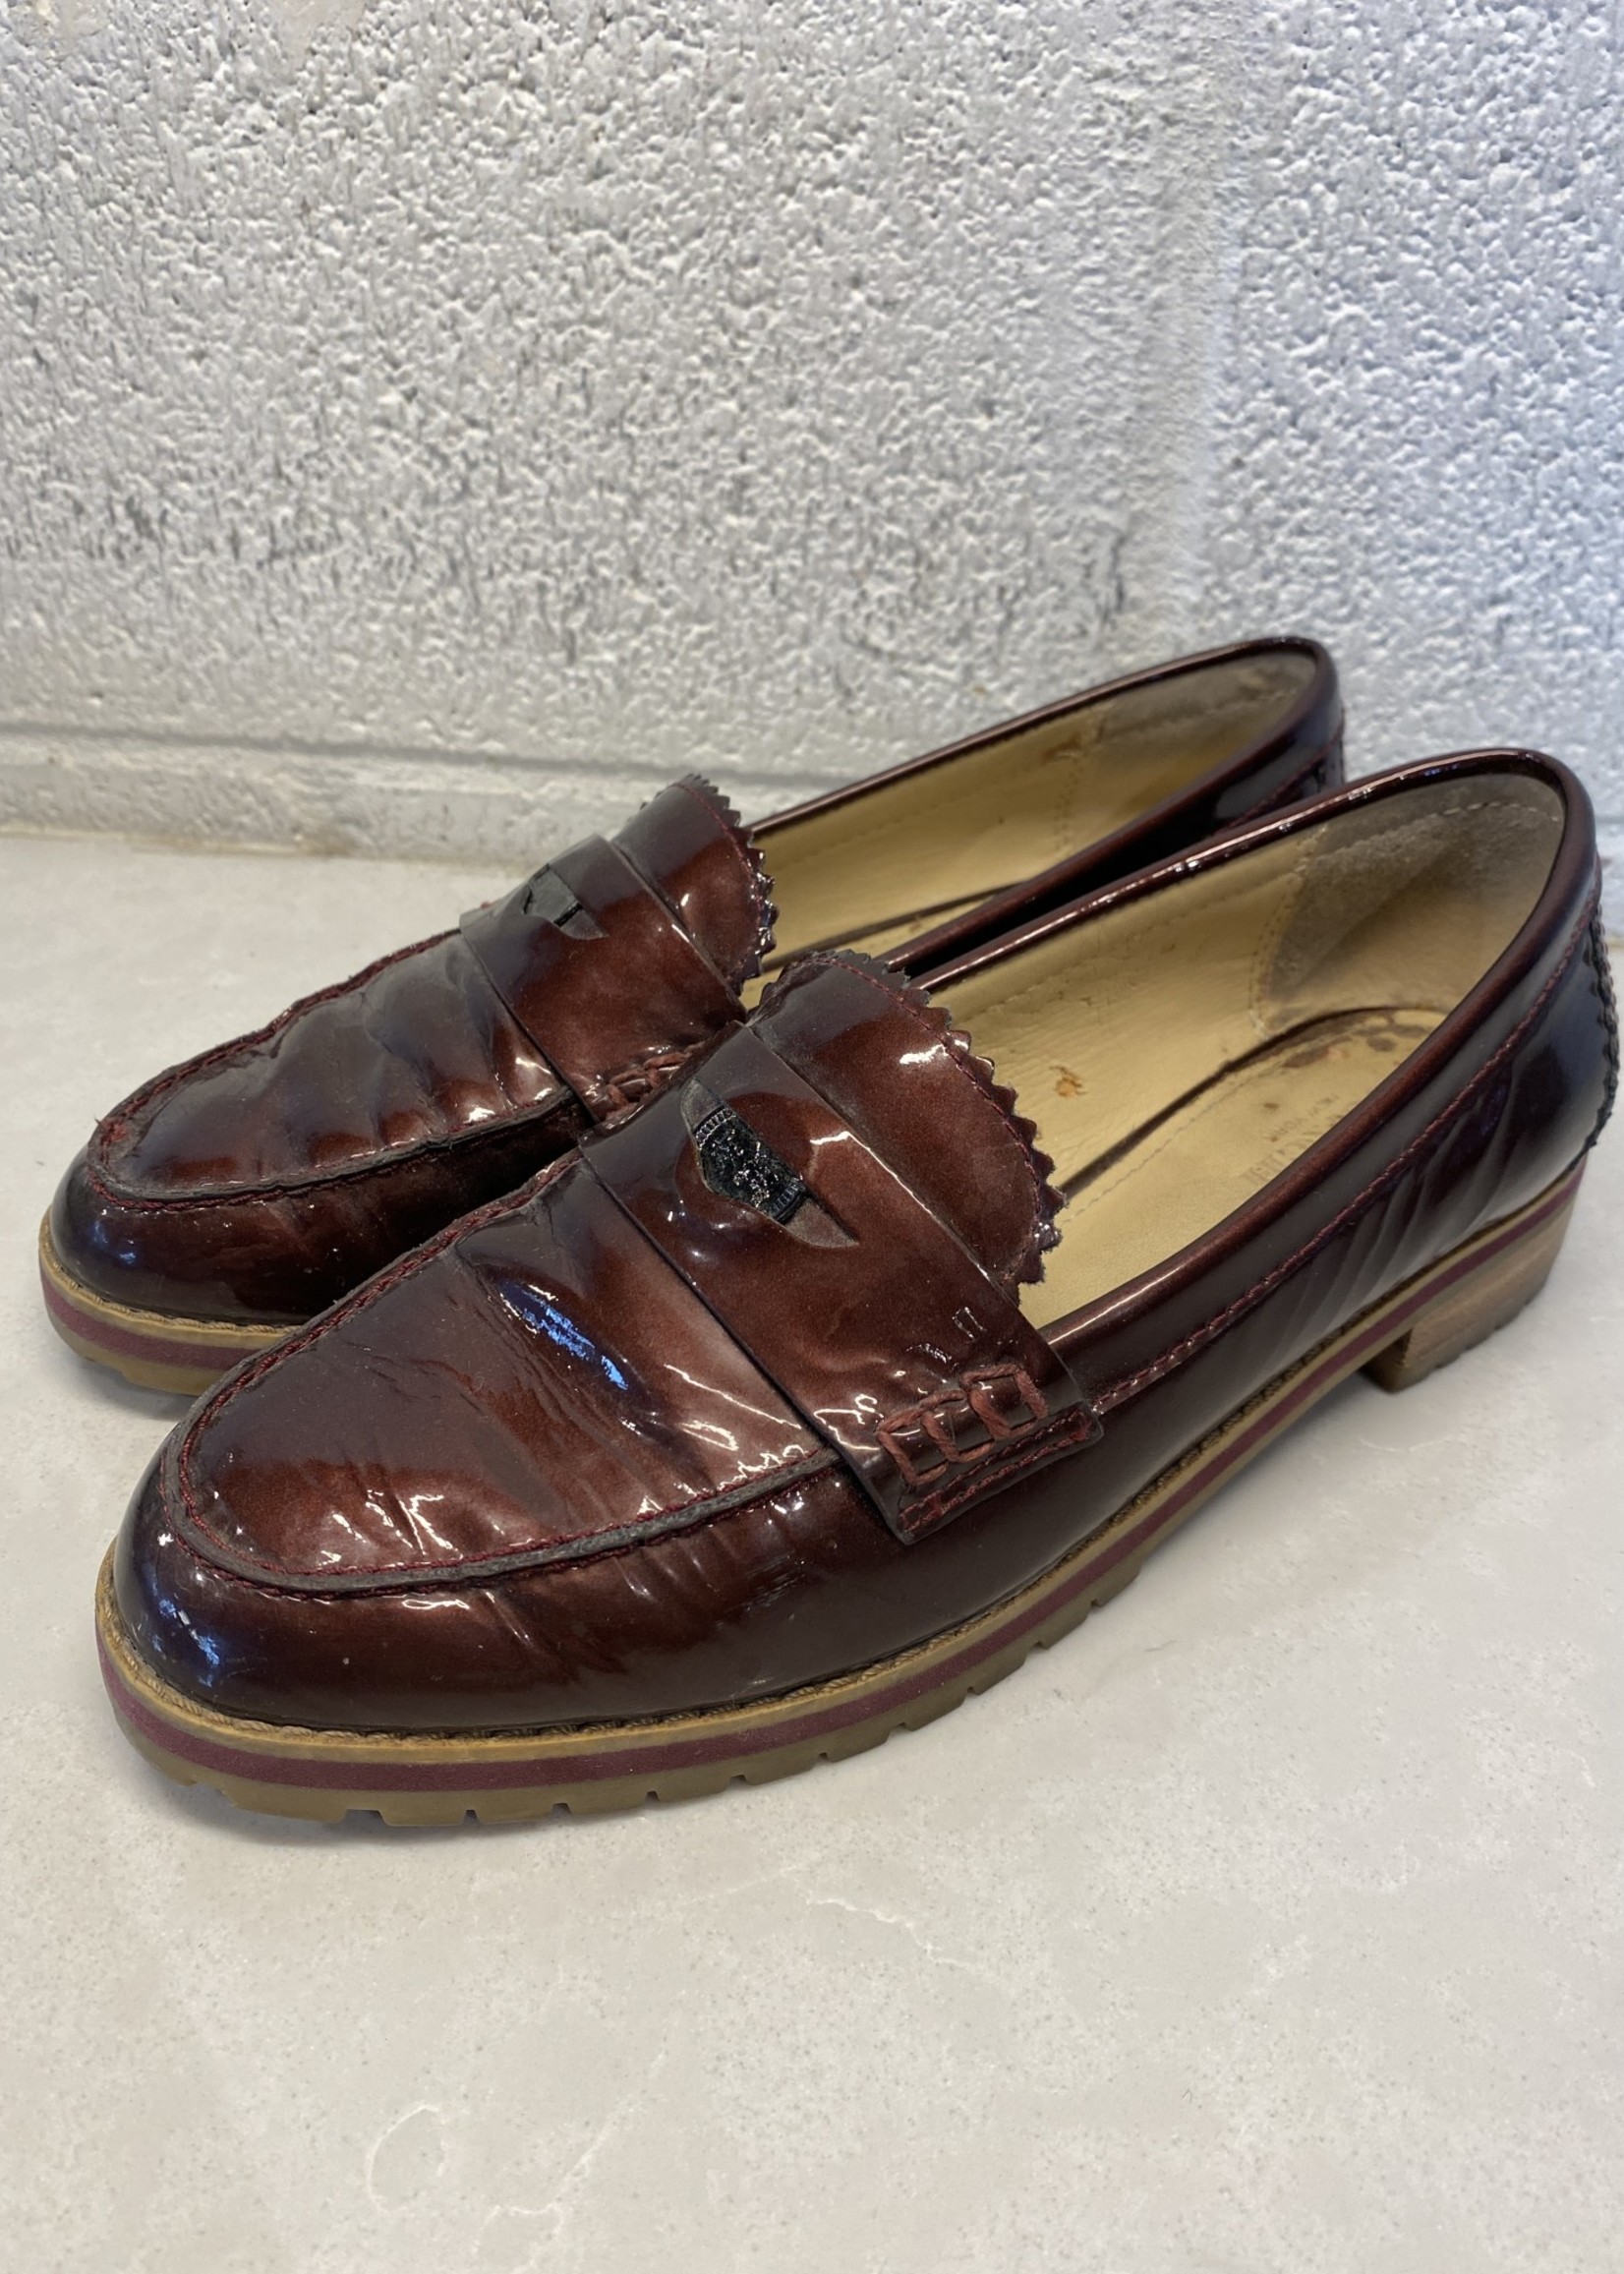 Coach Patent Leather Loafers 6.5 AS IS